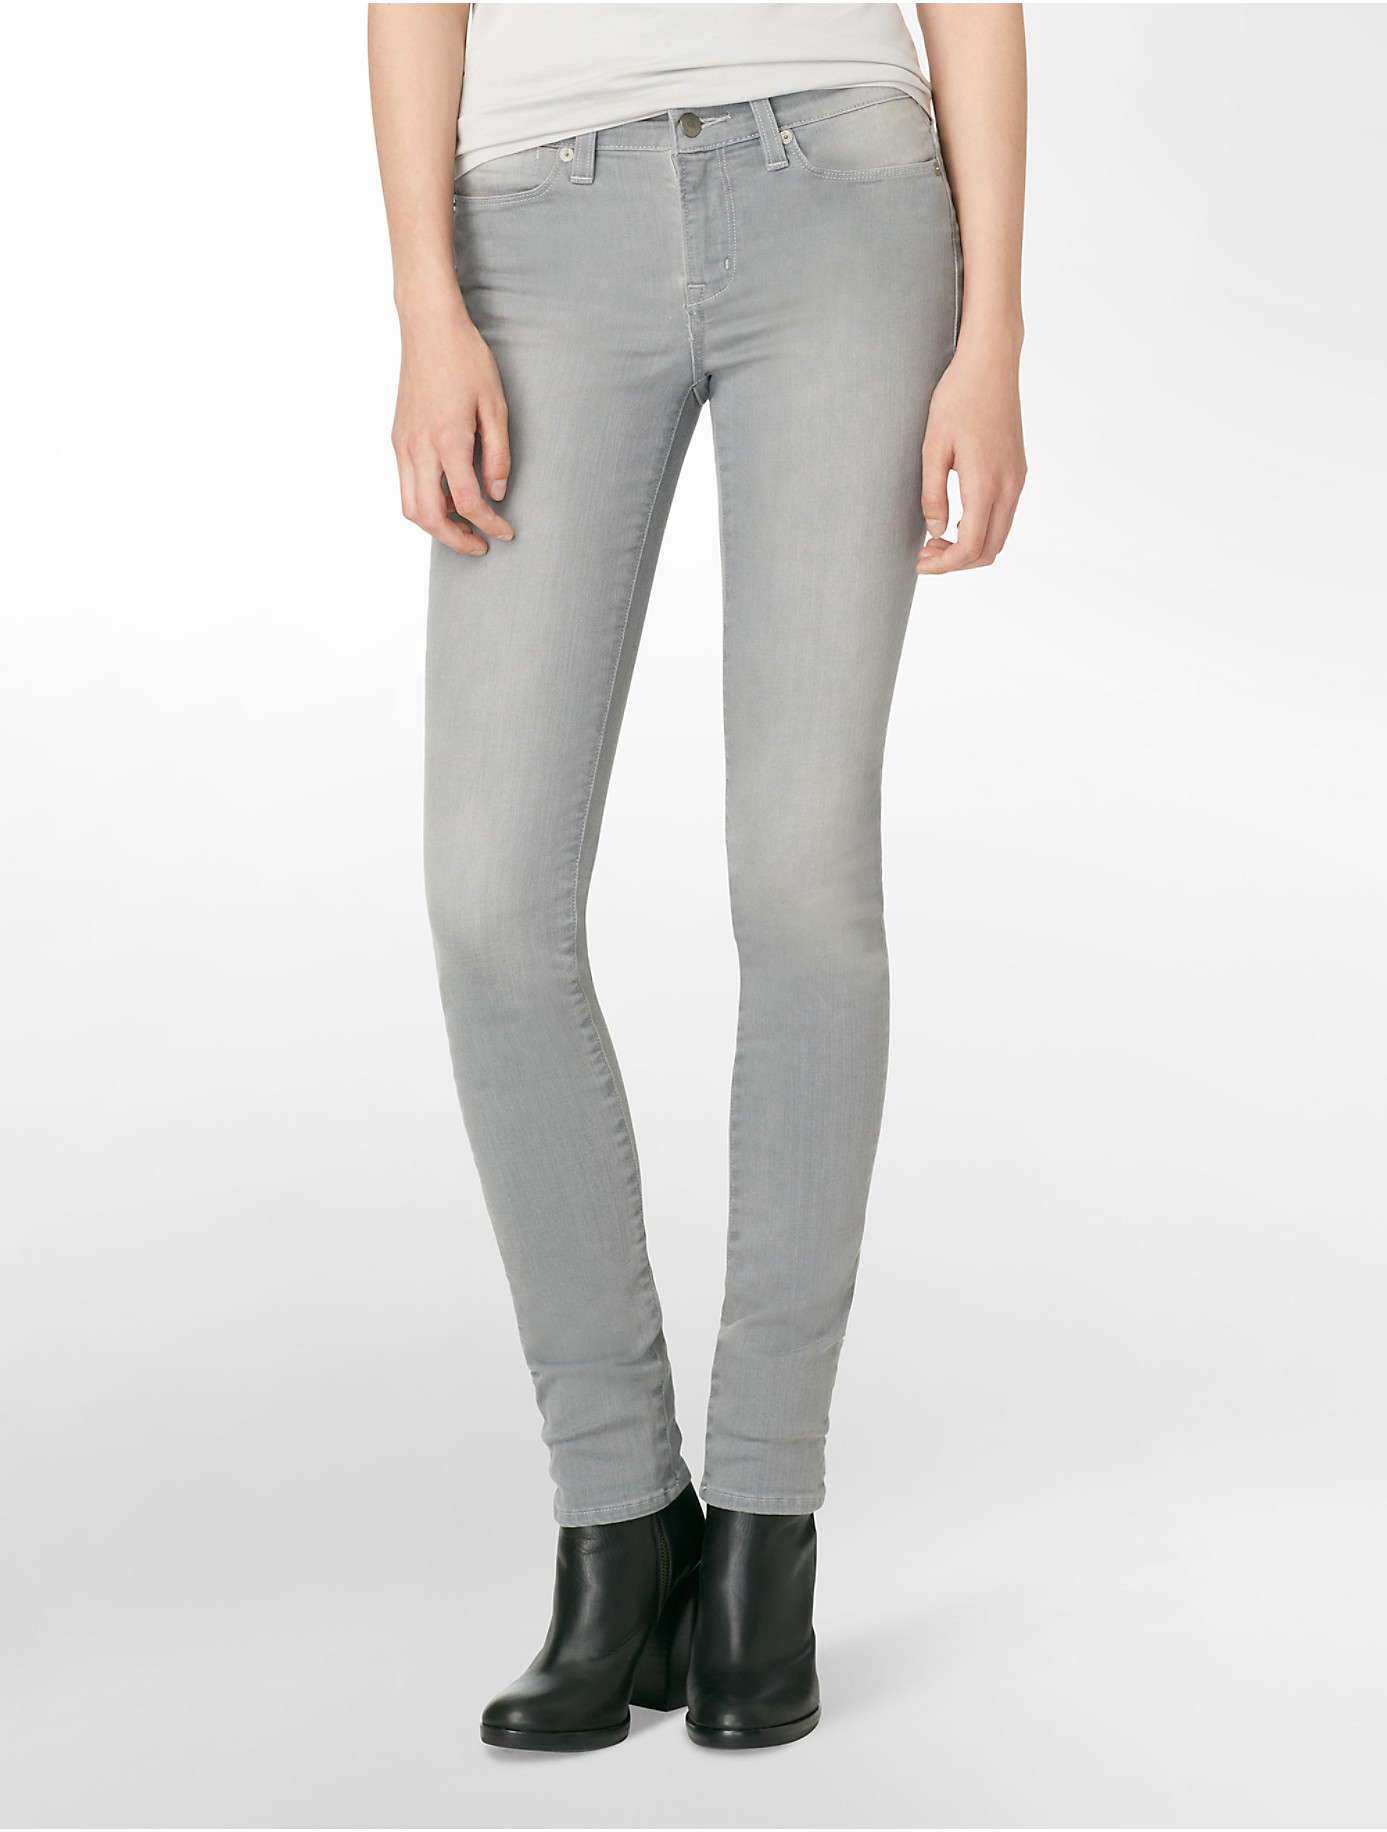 Calvin klein Jeans Ultimate Skinny Soft Grey Wash Jeans in Gray | Lyst